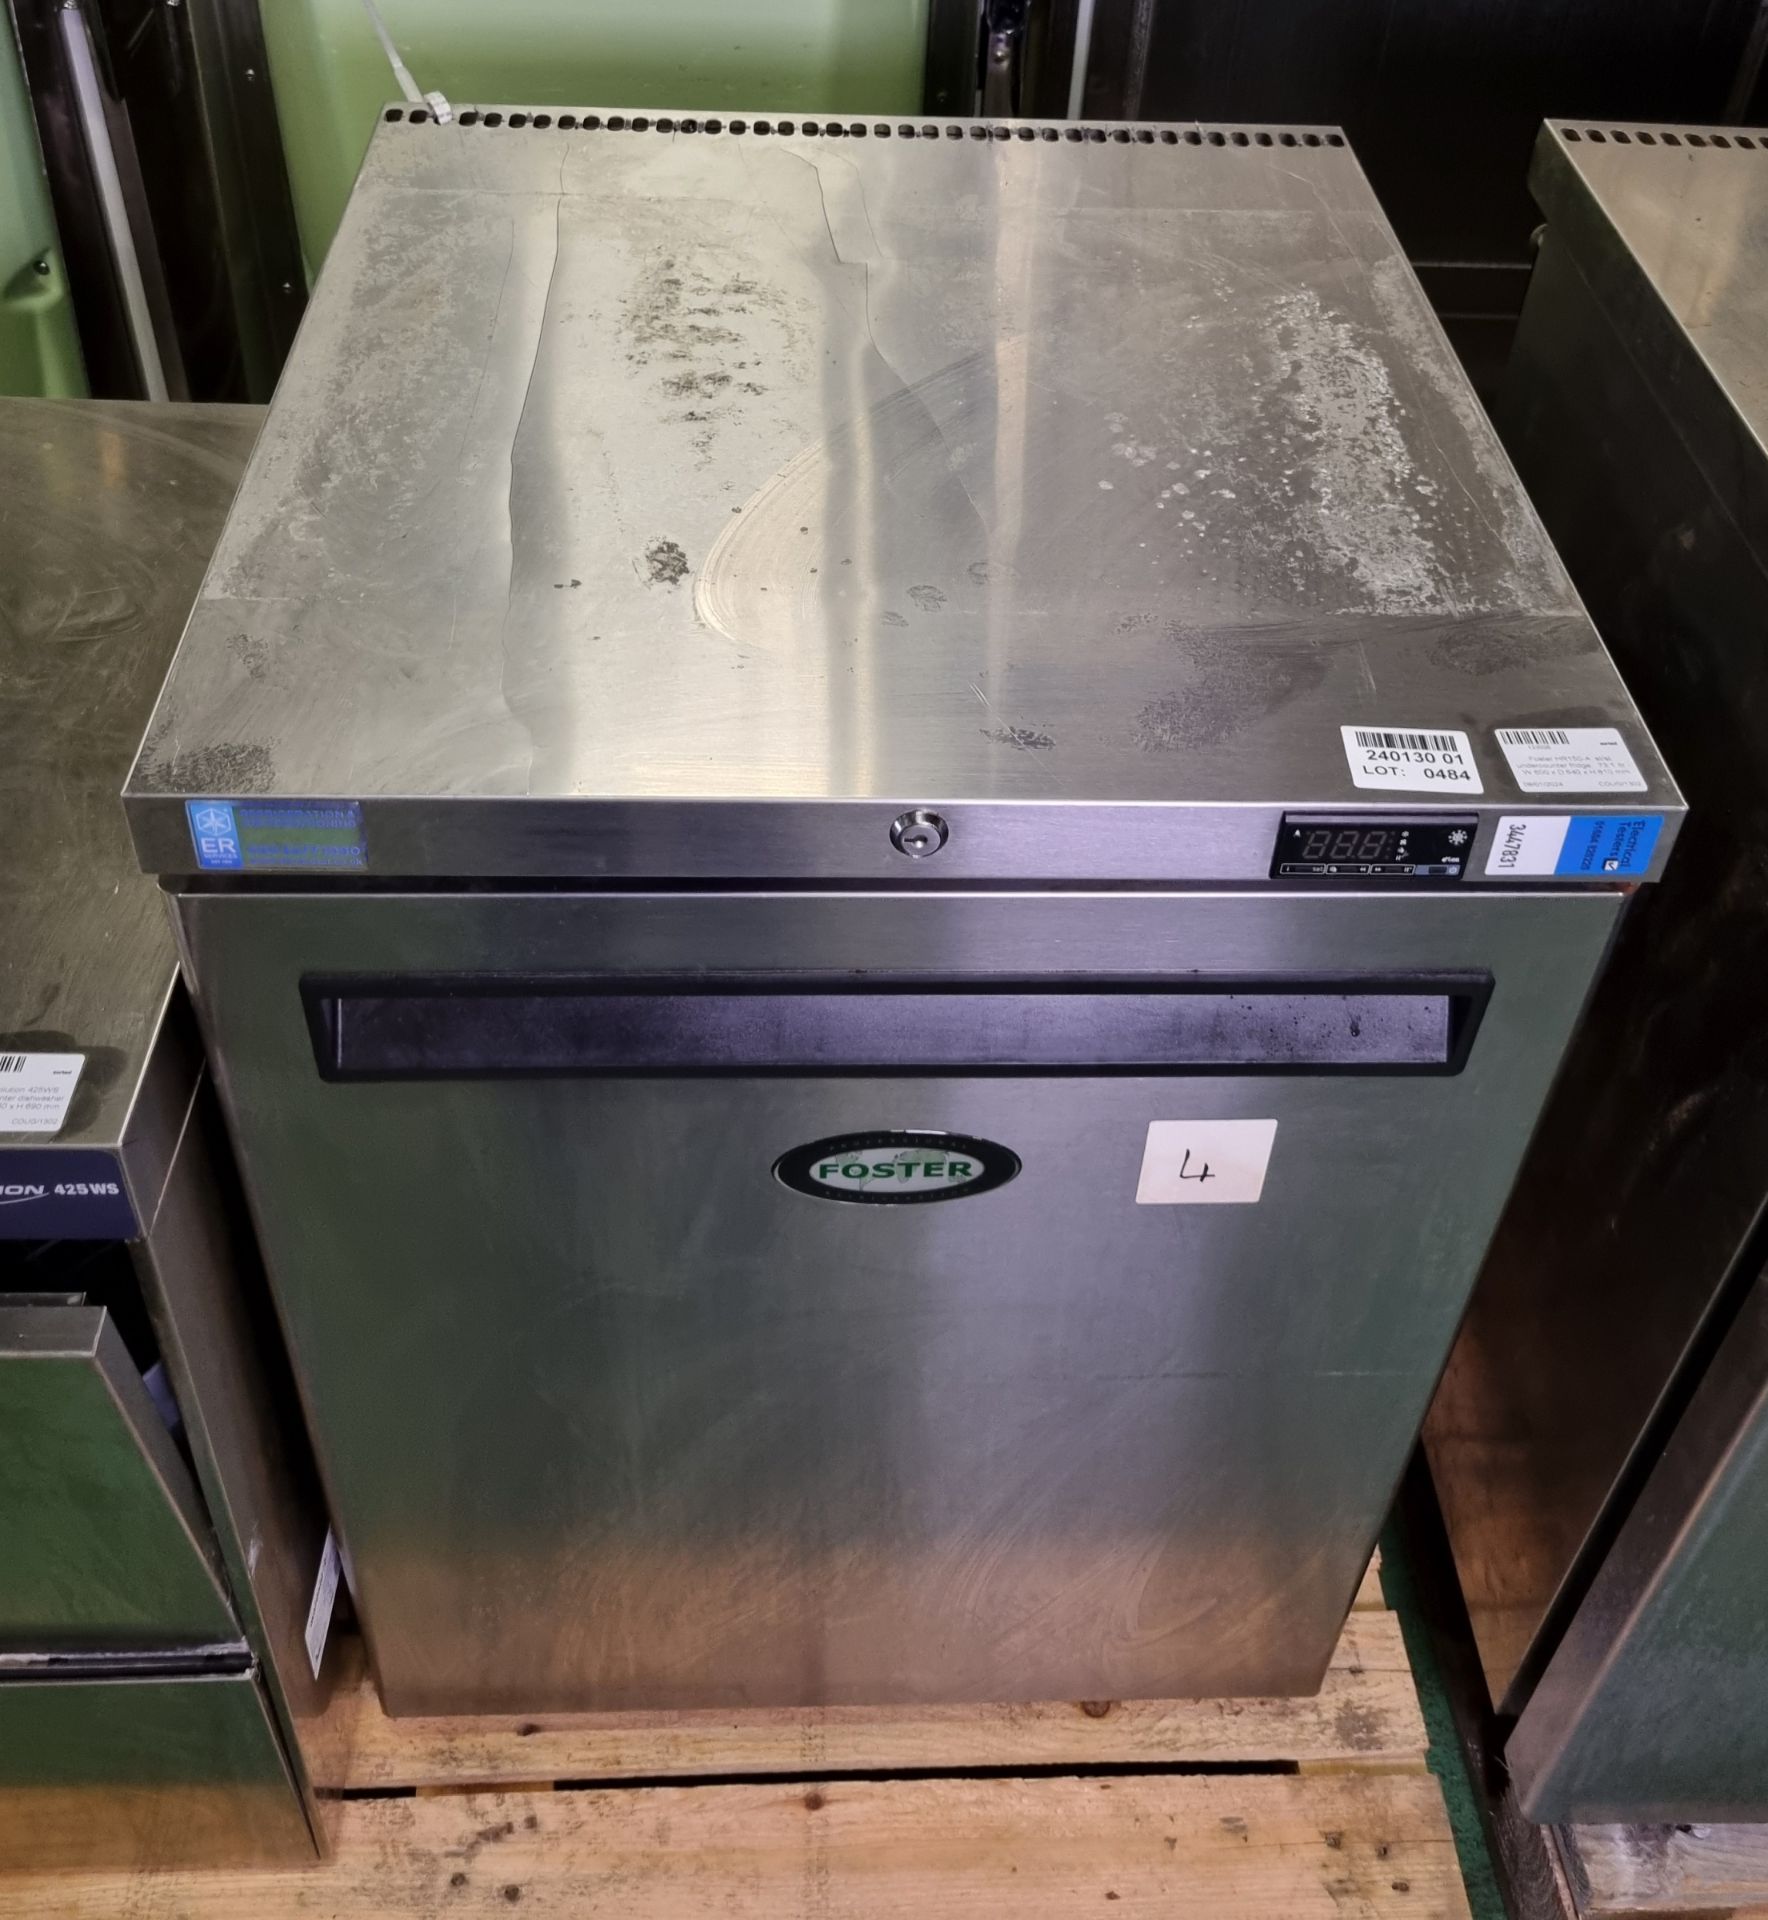 Foster HR150-A stainless steel undercounter fridge, 73.1 ltr - W 600 x D 640 x H 810 mm - Image 2 of 4